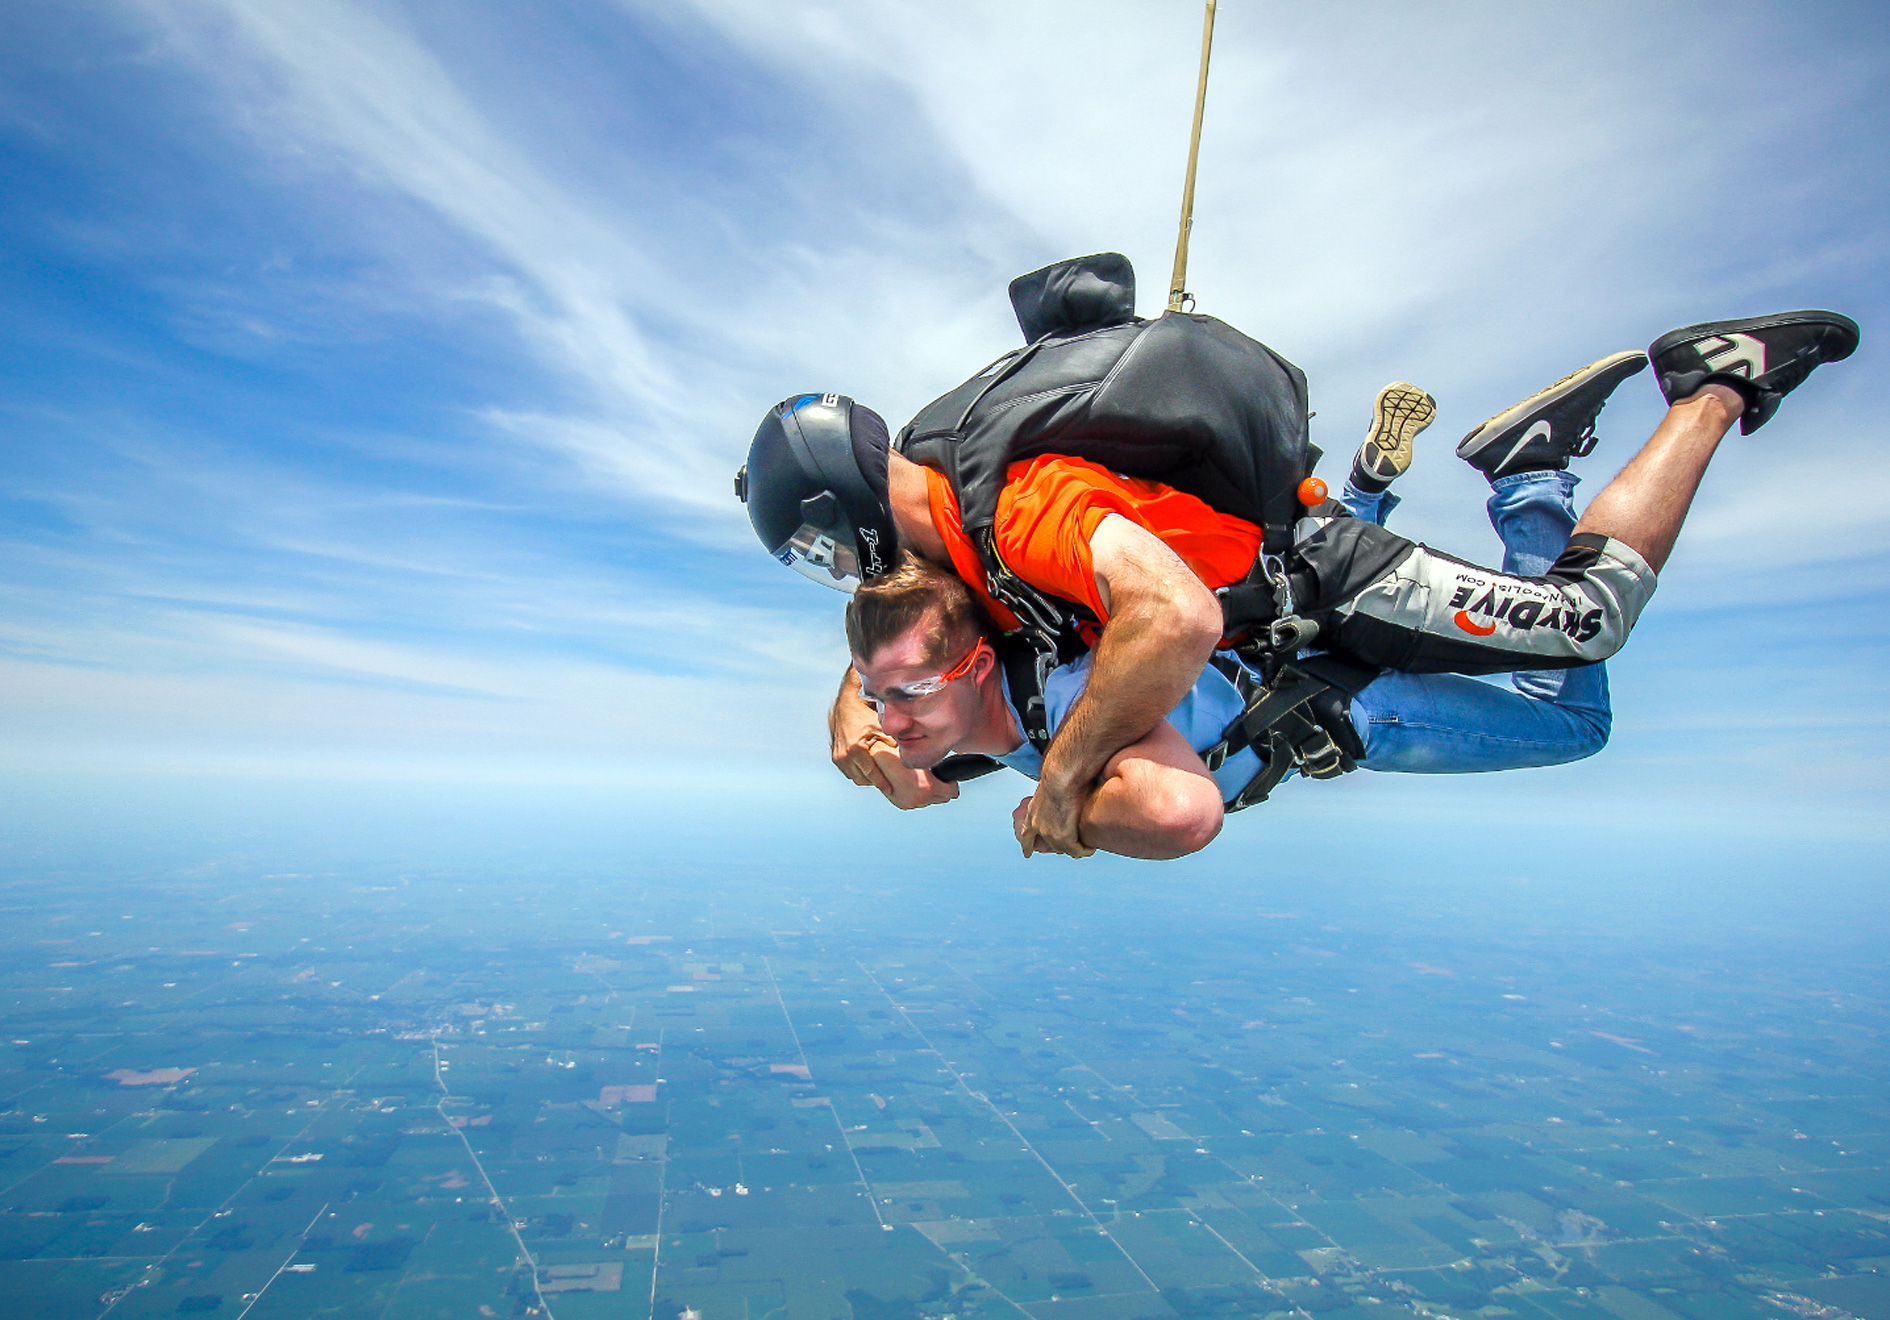 two people skydiving together